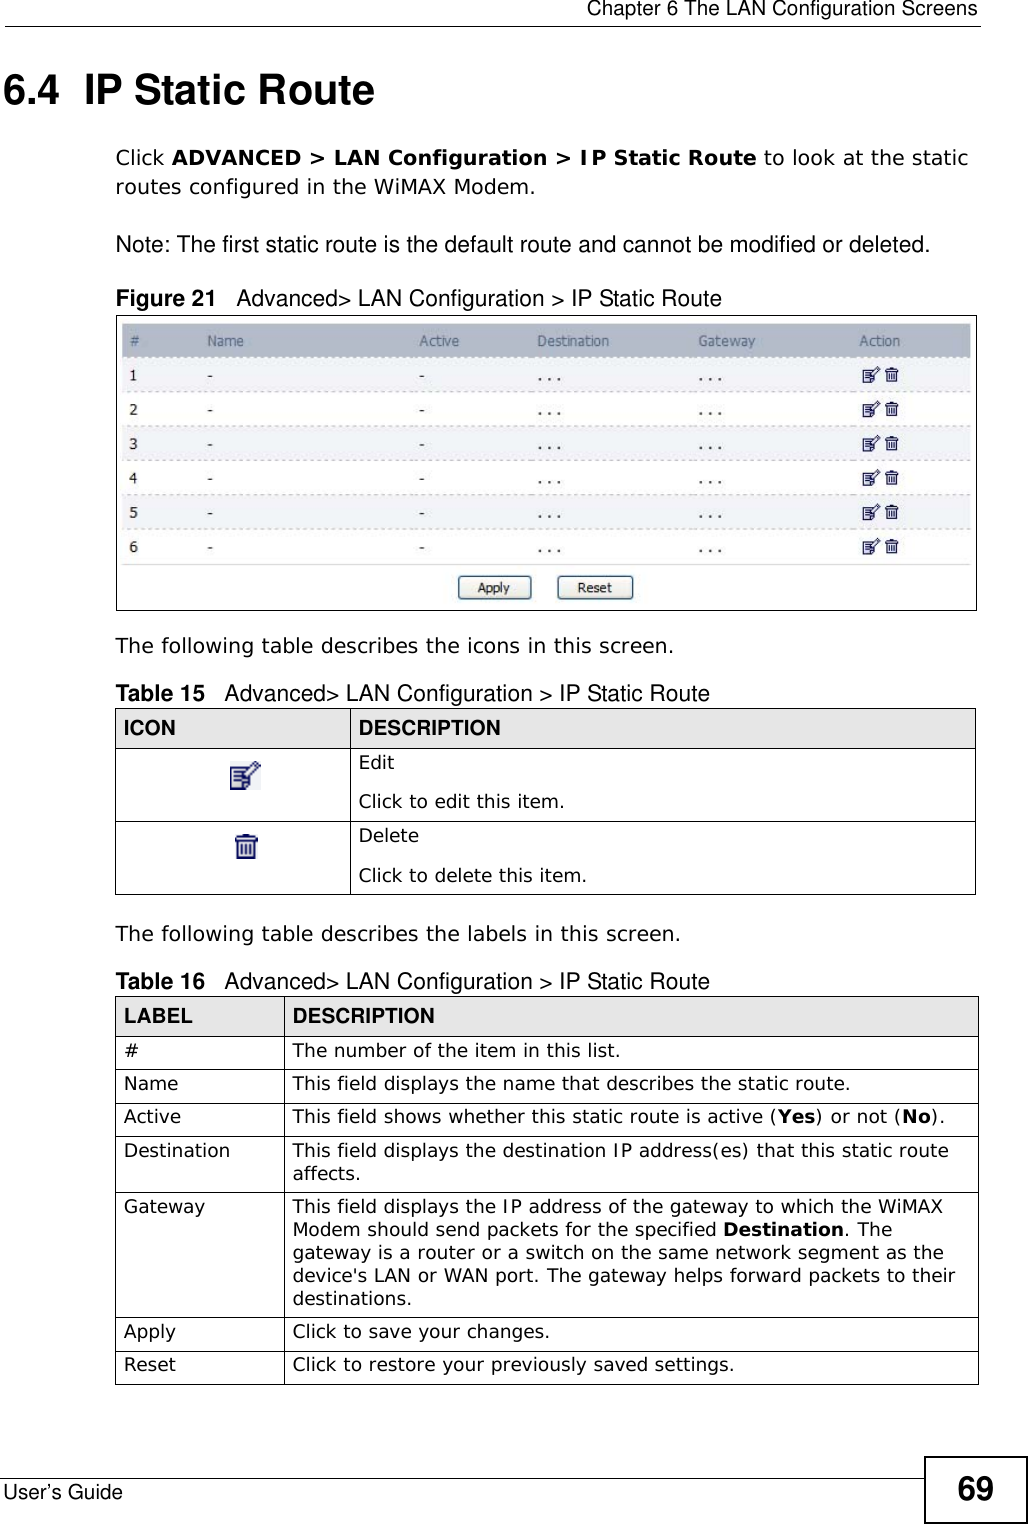  Chapter 6 The LAN Configuration ScreensUser’s Guide 696.4  IP Static RouteClick ADVANCED &gt; LAN Configuration &gt; IP Static Route to look at the static routes configured in the WiMAX Modem.Note: The first static route is the default route and cannot be modified or deleted.Figure 21   Advanced&gt; LAN Configuration &gt; IP Static RouteThe following table describes the icons in this screen.The following table describes the labels in this screen. Table 15   Advanced&gt; LAN Configuration &gt; IP Static RouteICON DESCRIPTIONEditClick to edit this item.DeleteClick to delete this item.Table 16   Advanced&gt; LAN Configuration &gt; IP Static RouteLABEL DESCRIPTION#The number of the item in this list.Name This field displays the name that describes the static route.Active This field shows whether this static route is active (Yes) or not (No).Destination This field displays the destination IP address(es) that this static route affects.Gateway This field displays the IP address of the gateway to which the WiMAX Modem should send packets for the specified Destination. The gateway is a router or a switch on the same network segment as the device&apos;s LAN or WAN port. The gateway helps forward packets to their destinations.Apply Click to save your changes.Reset Click to restore your previously saved settings.